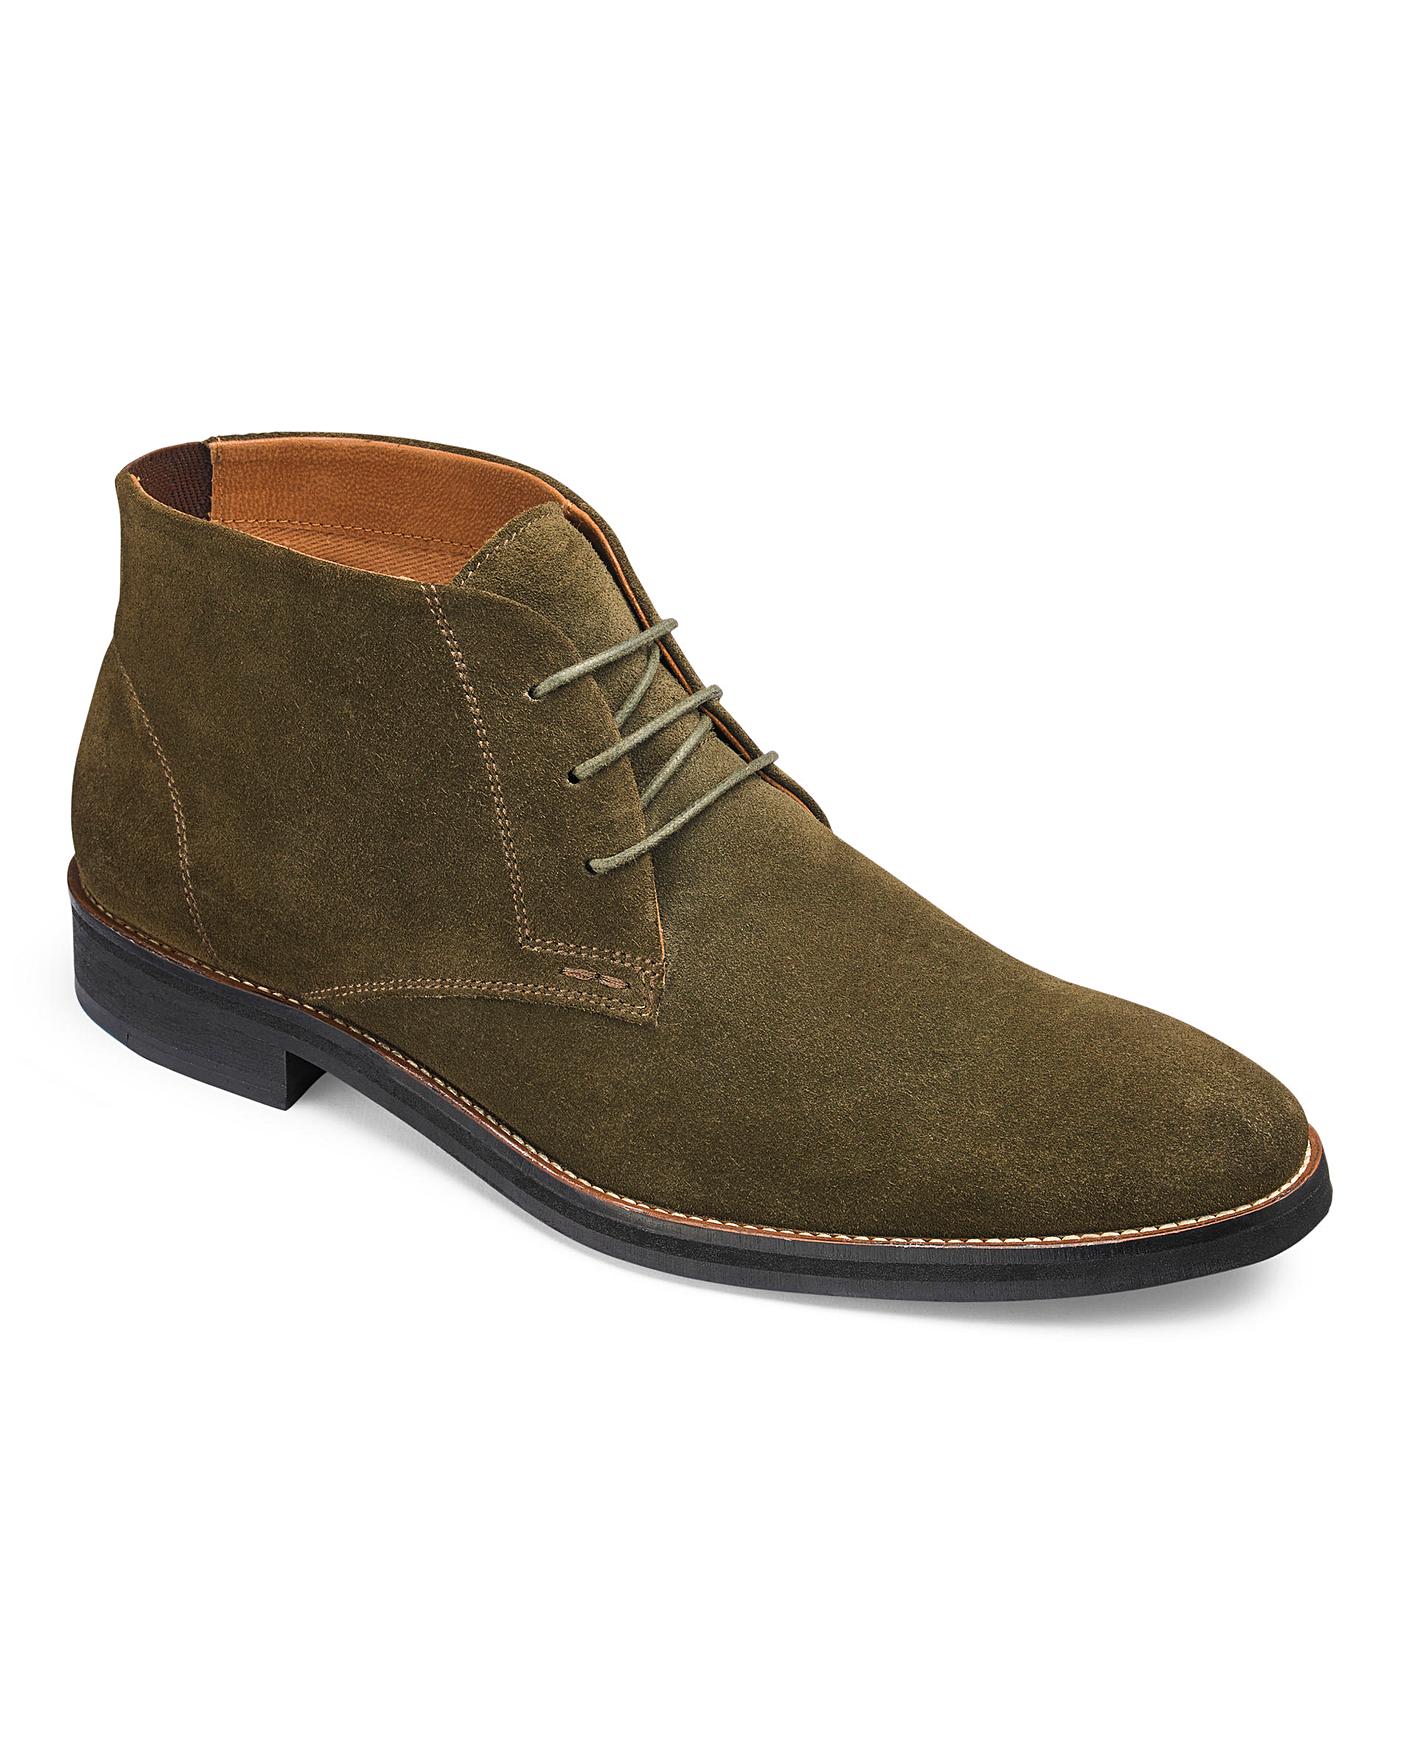 Joe Browns Suede Chukka Boots | Crazy Clearance